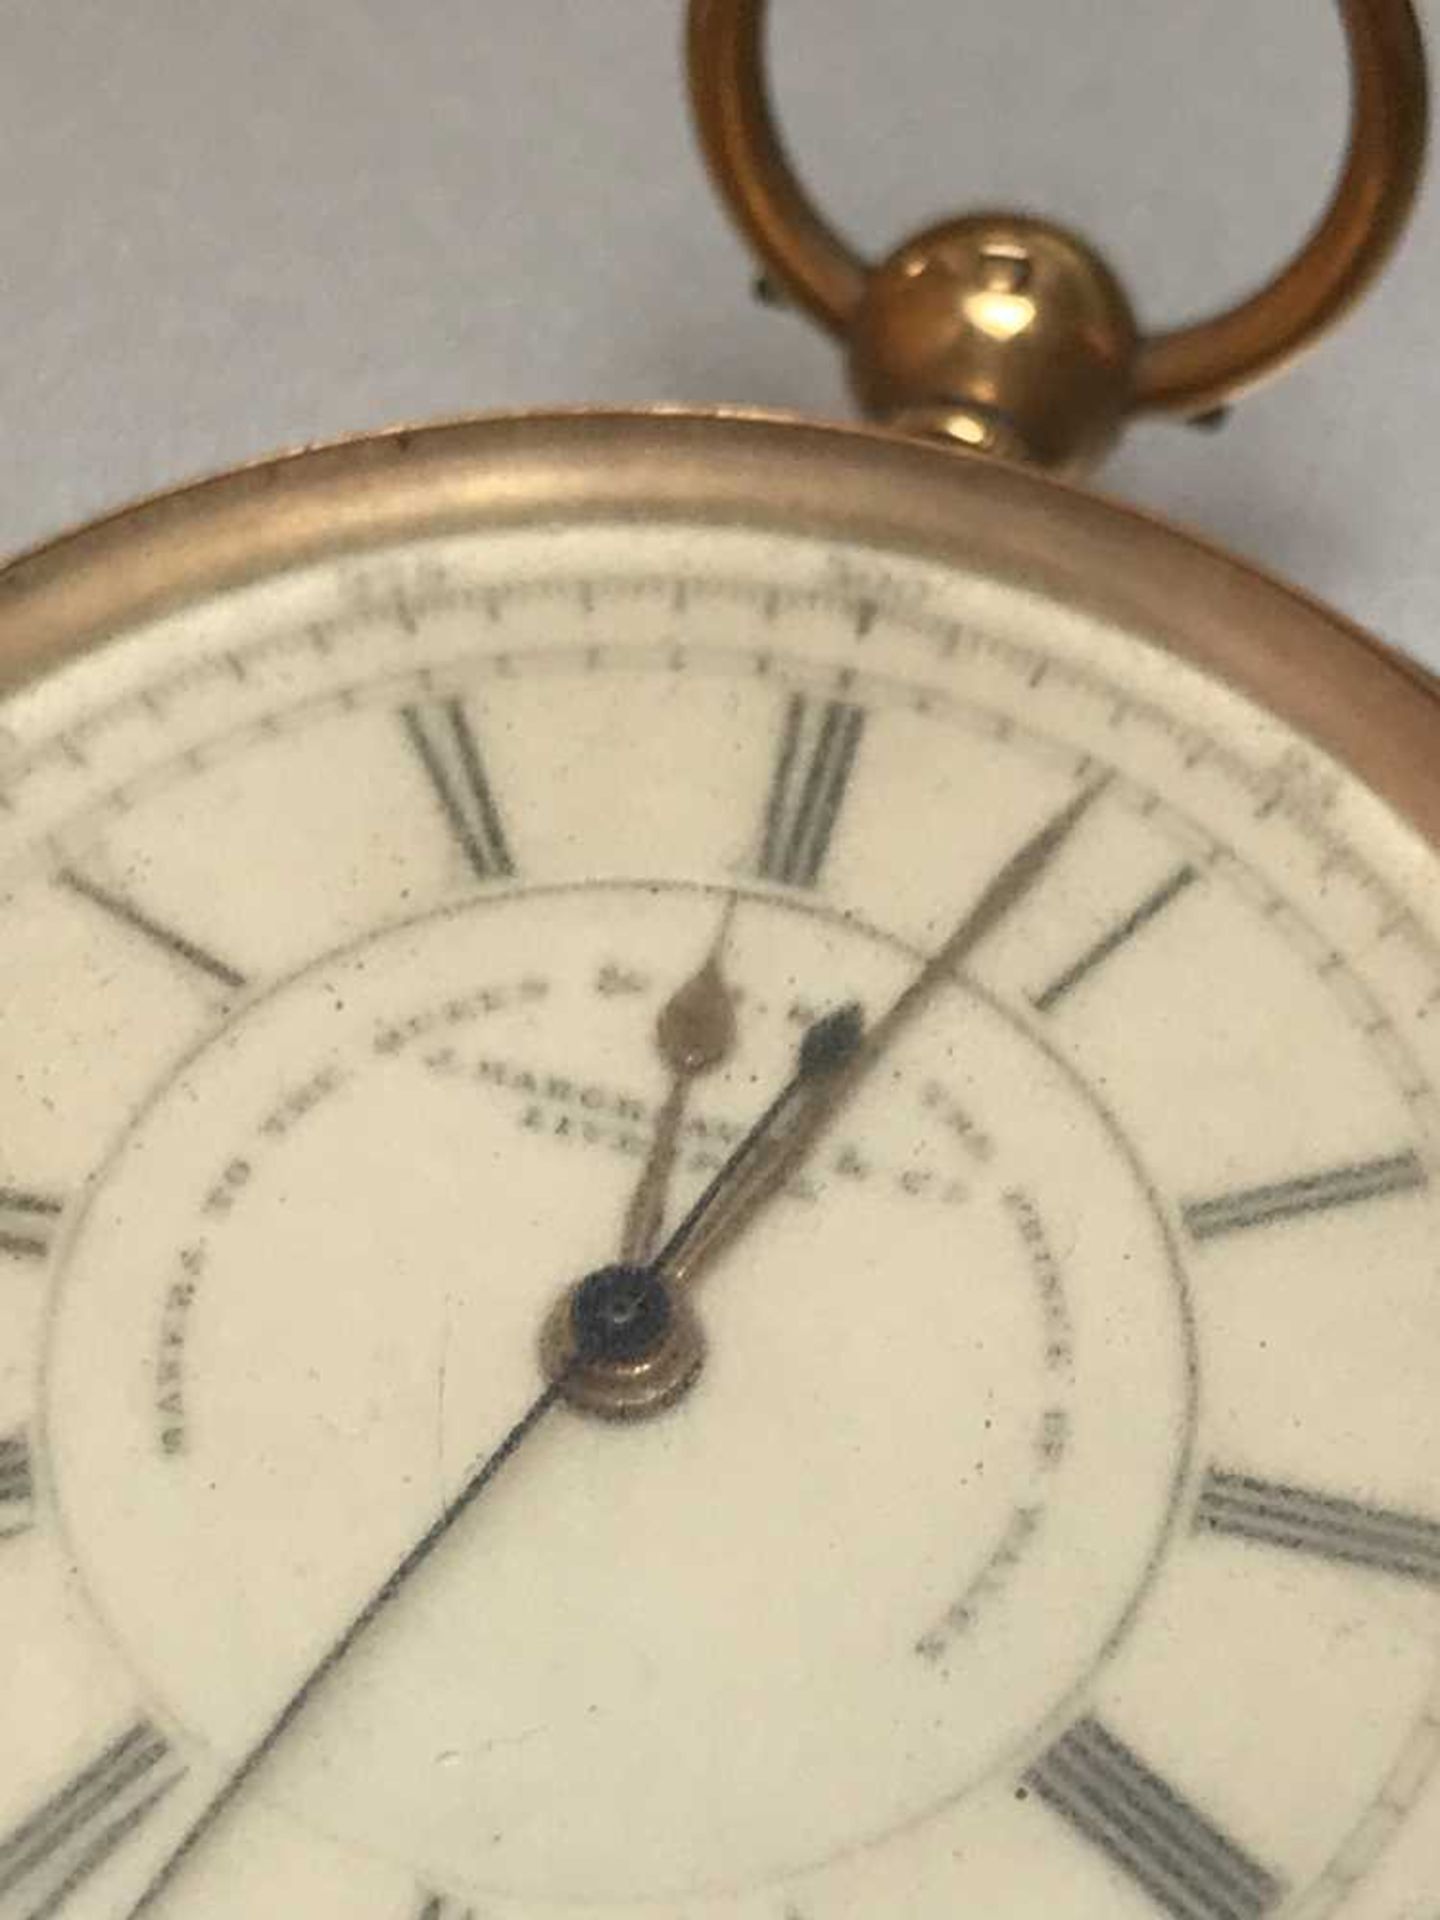 J. Hargreaves & Co.: a gold pocket watch - Image 4 of 7